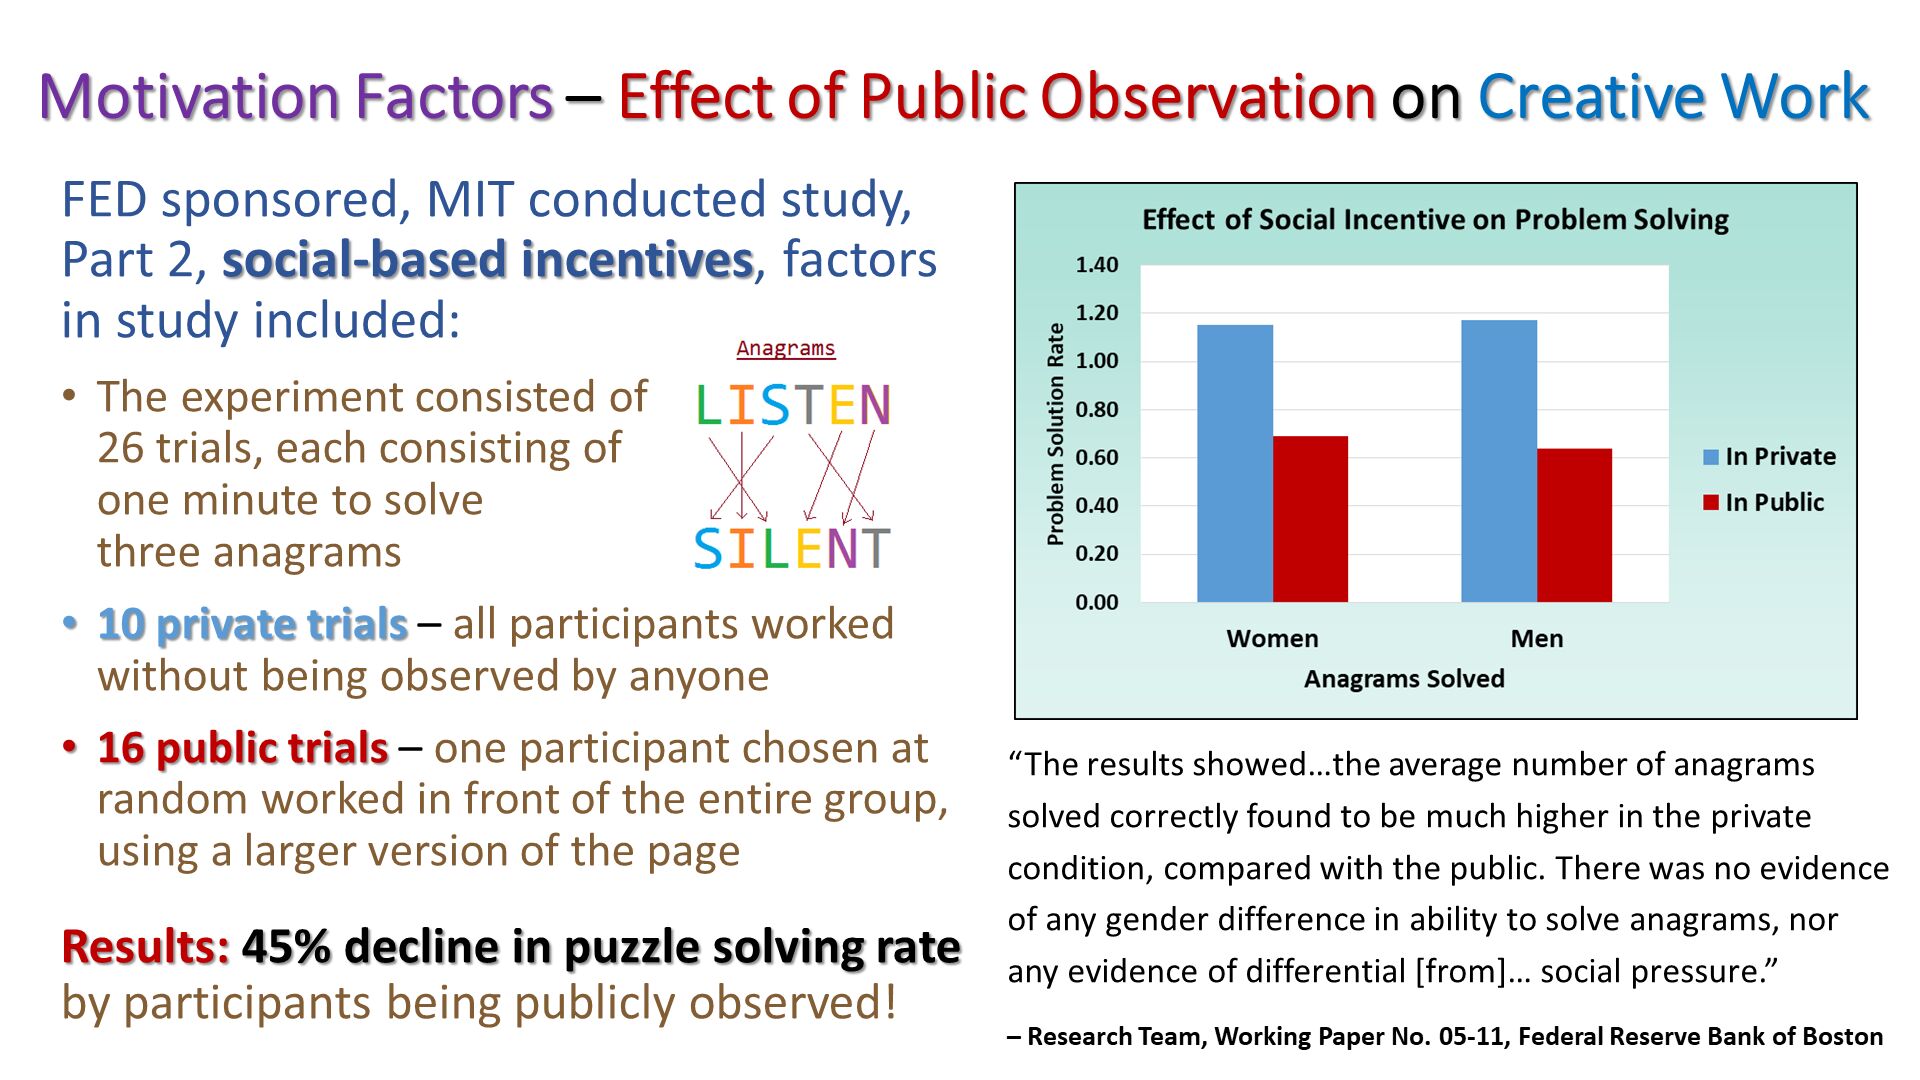 Motivation Factors – Effect of Public Observation on Creative Work. “The results showed…the average number of anagrams solved correctly found to be much higher in the private condition, compared with the public. There was no evidence of any gender difference in ability to solve anagrams, nor any evidence of differential [from]… social pressure.”
– Research Team, Working Paper No. 05-11, Federal Reserve Bank of Boston. FED sponsored, MIT conducted study, Part 2, social-based incentives, factors in study included:
The experiment consisted of 26 trials, each consisting of one minute to solve three anagrams
10 private trials – all participants worked without being observed by anyone
16 public trials – one participant chosen at random worked in front of the entire group, using a larger version of the page
Results: 45% decline in puzzle solving rate by participants being publicly observed!. 